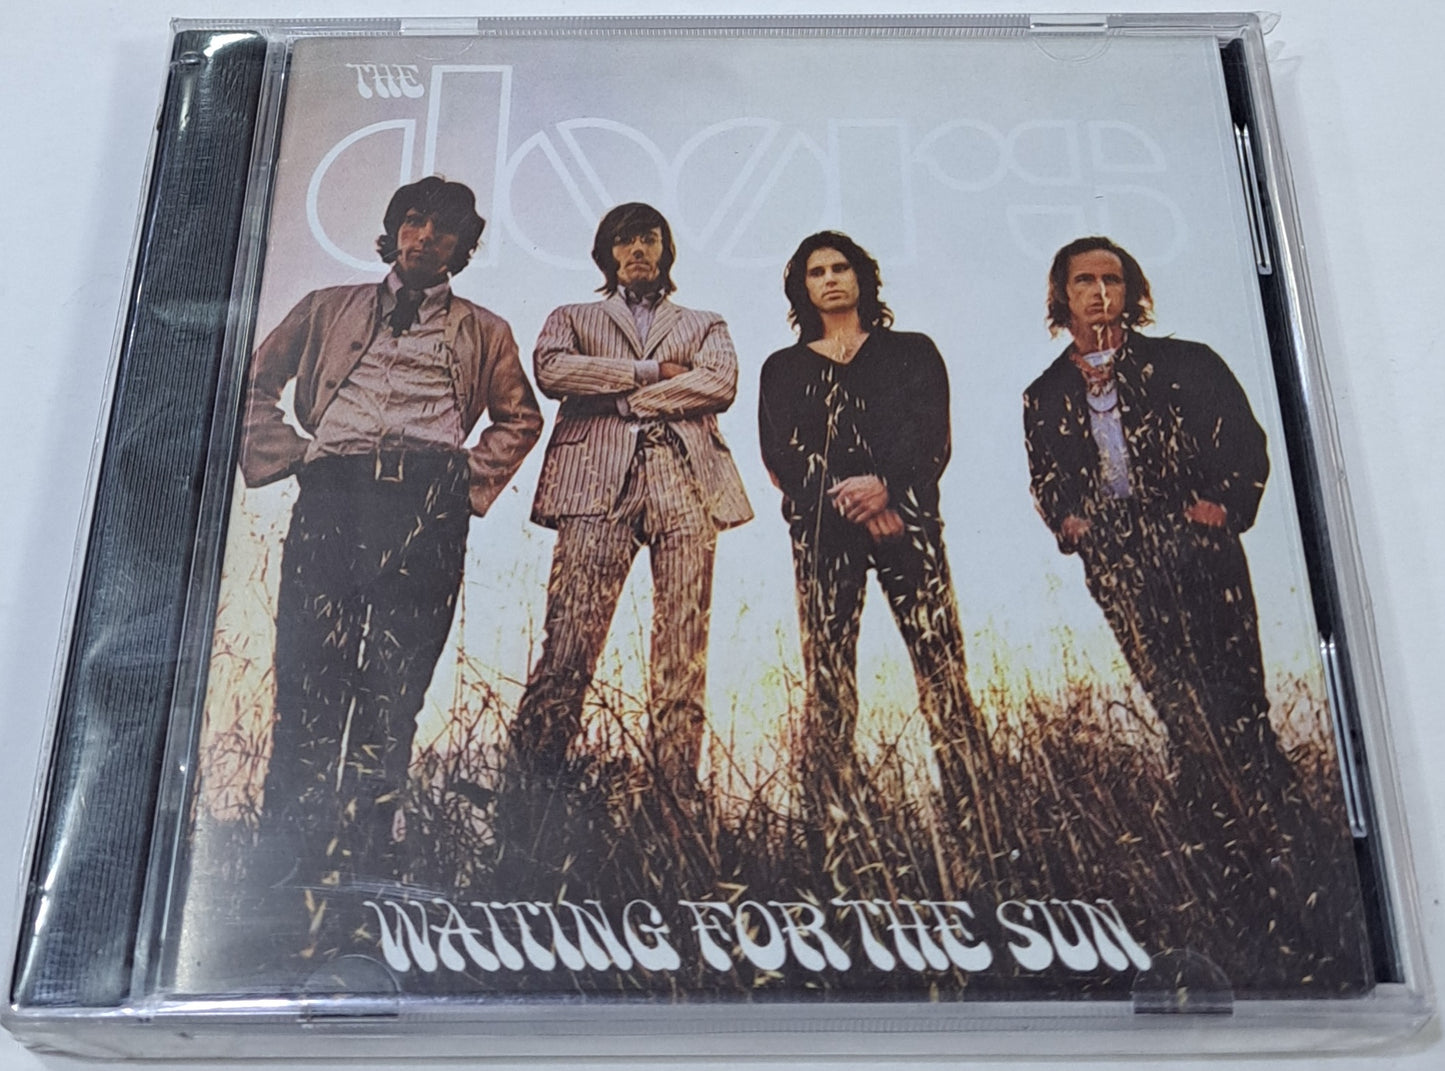 THE DOORS - WAITING FOR THE SUN CD